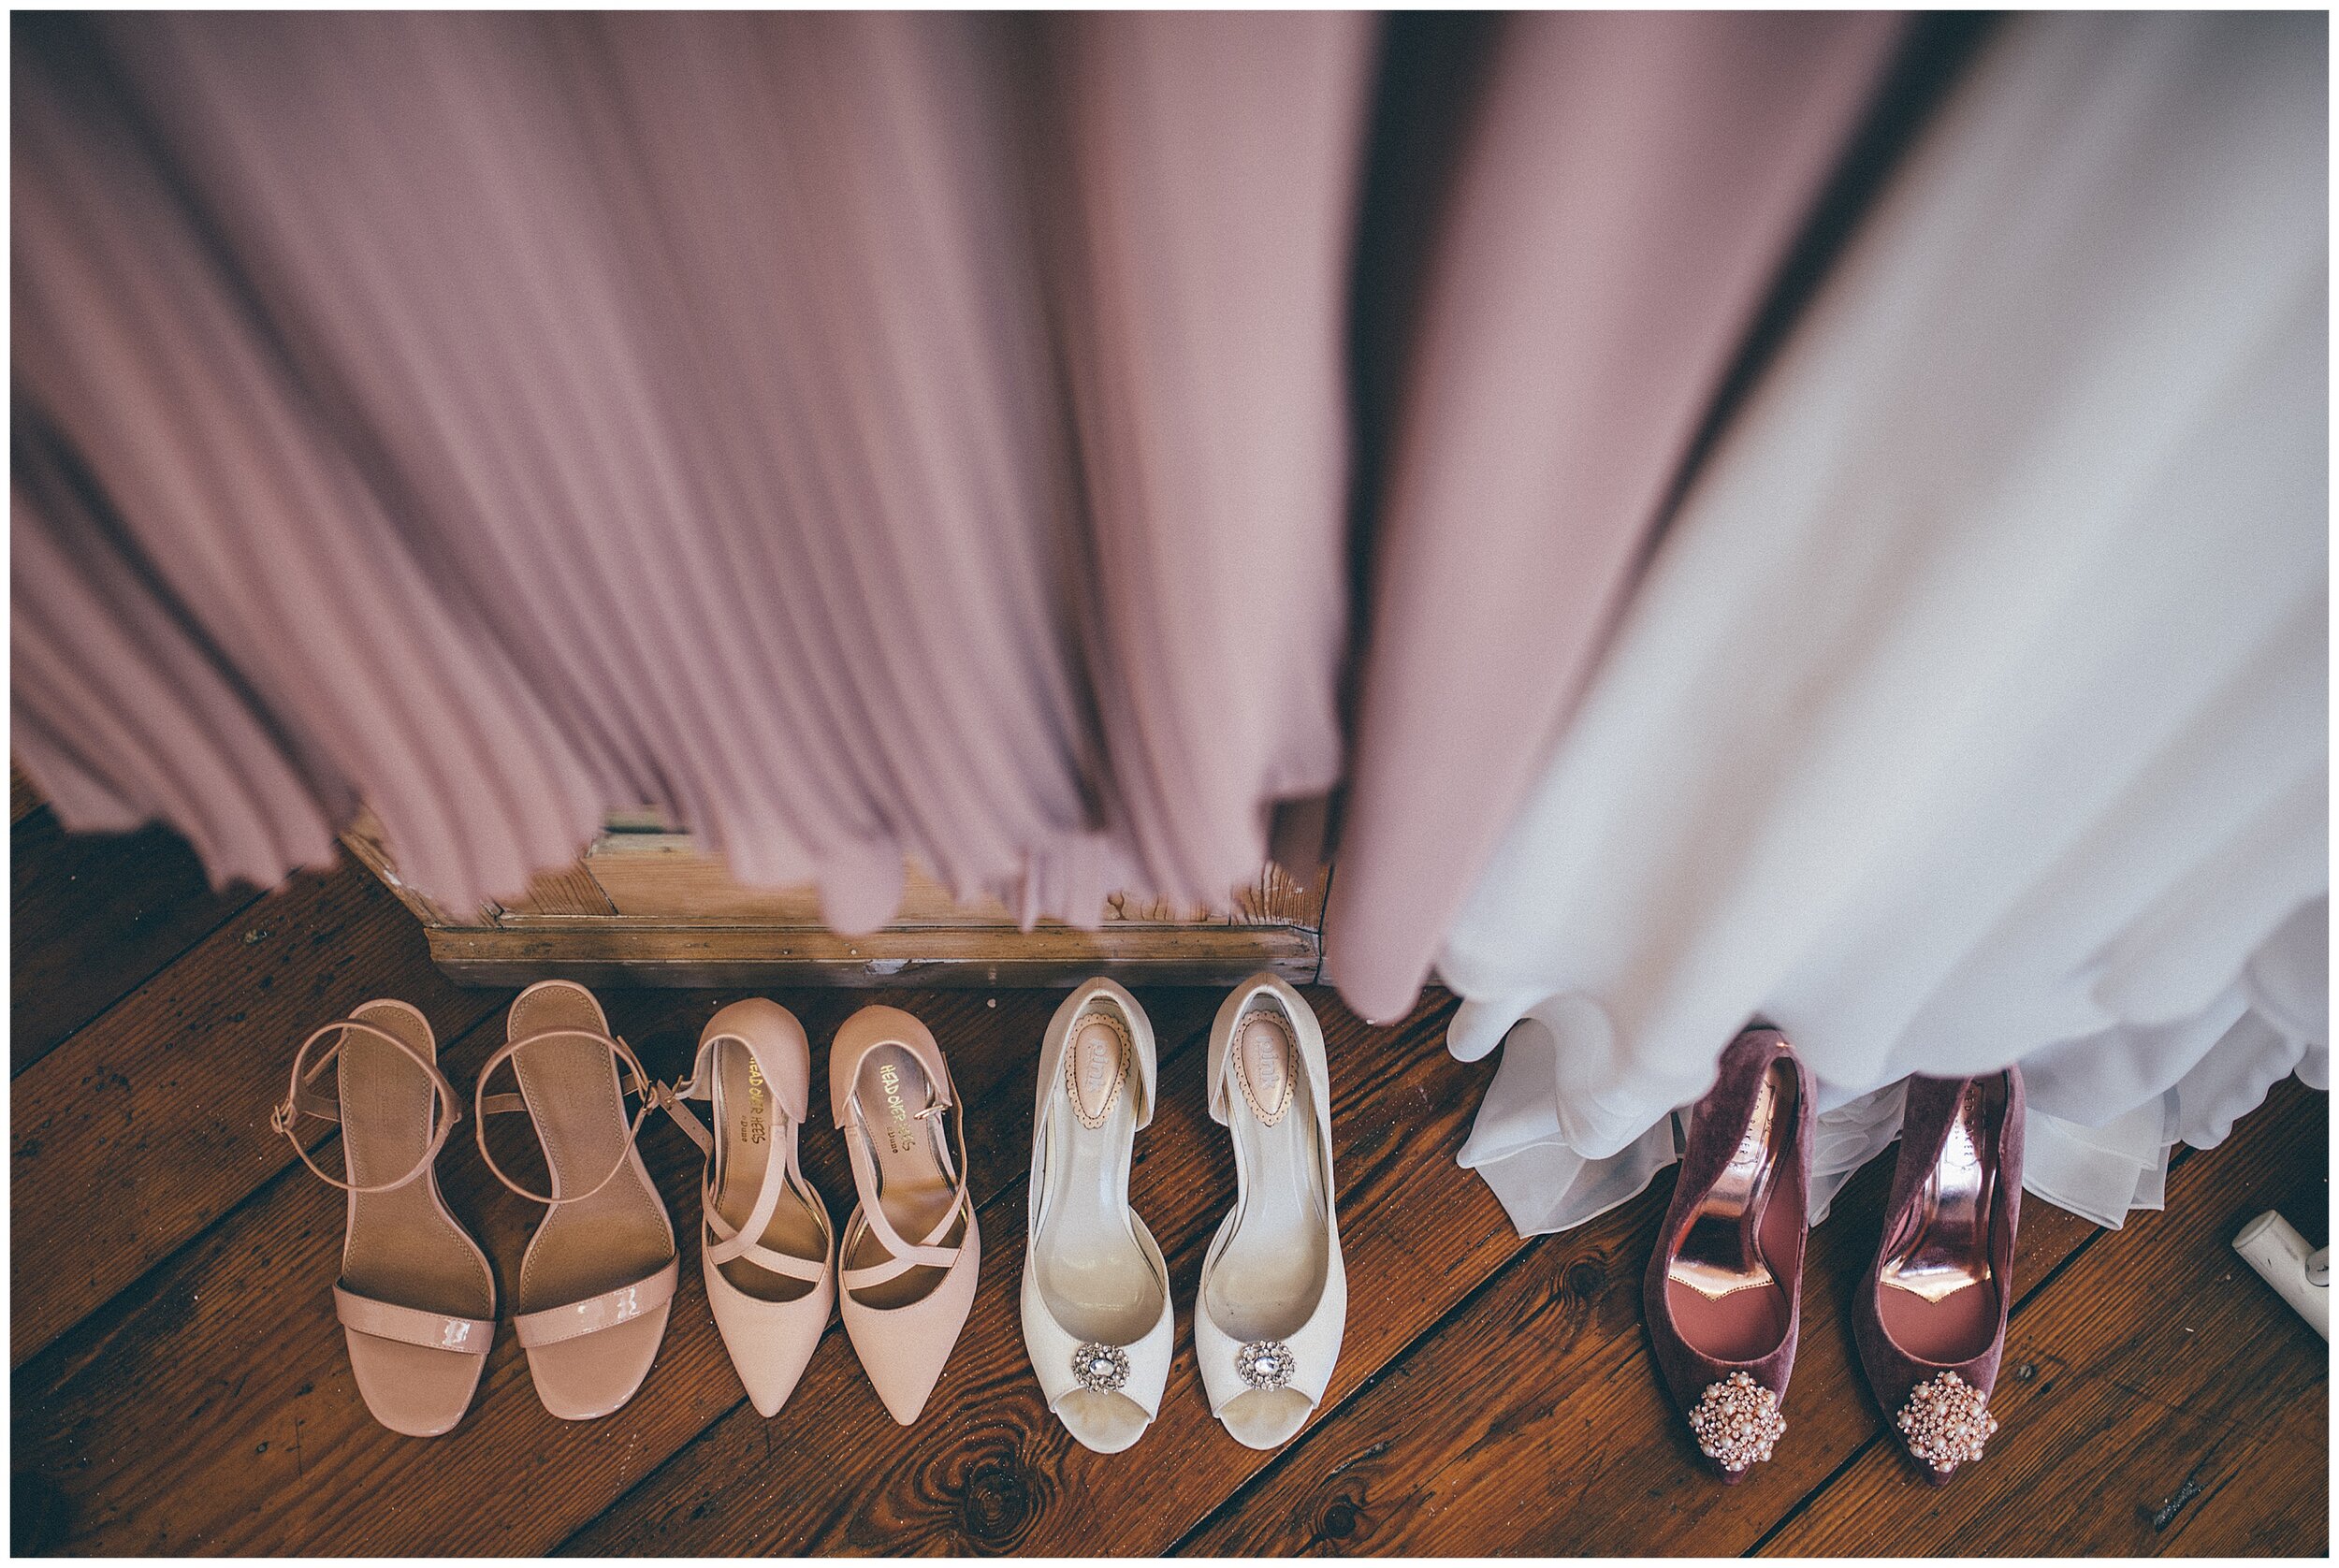 Bride and bridesmaids shoes placed neatly together in the bridal suite in Cheshire wedding venue.